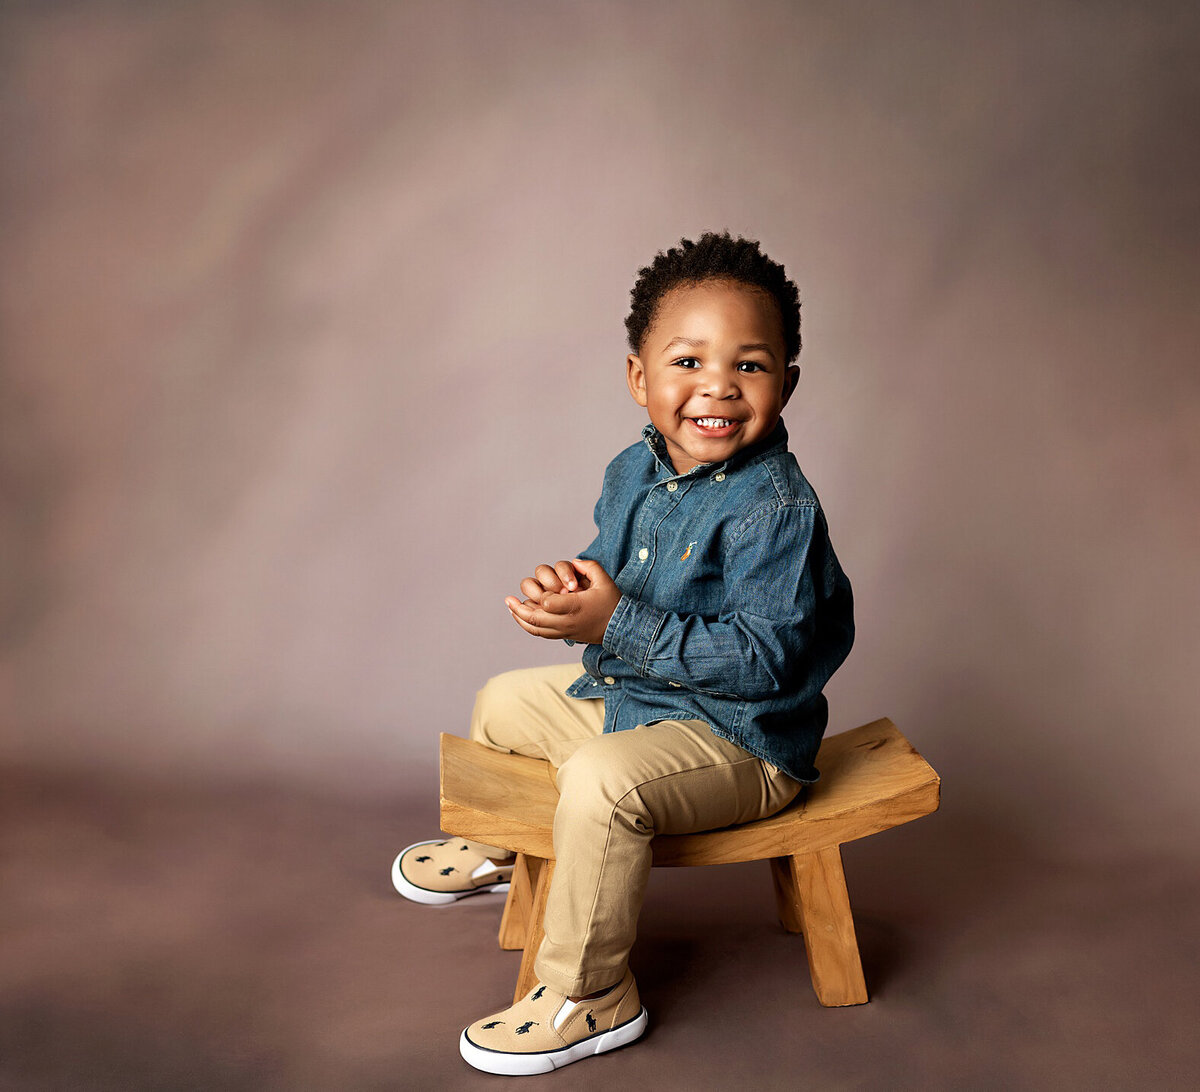 A young boy with a bright smile posing on small bench.